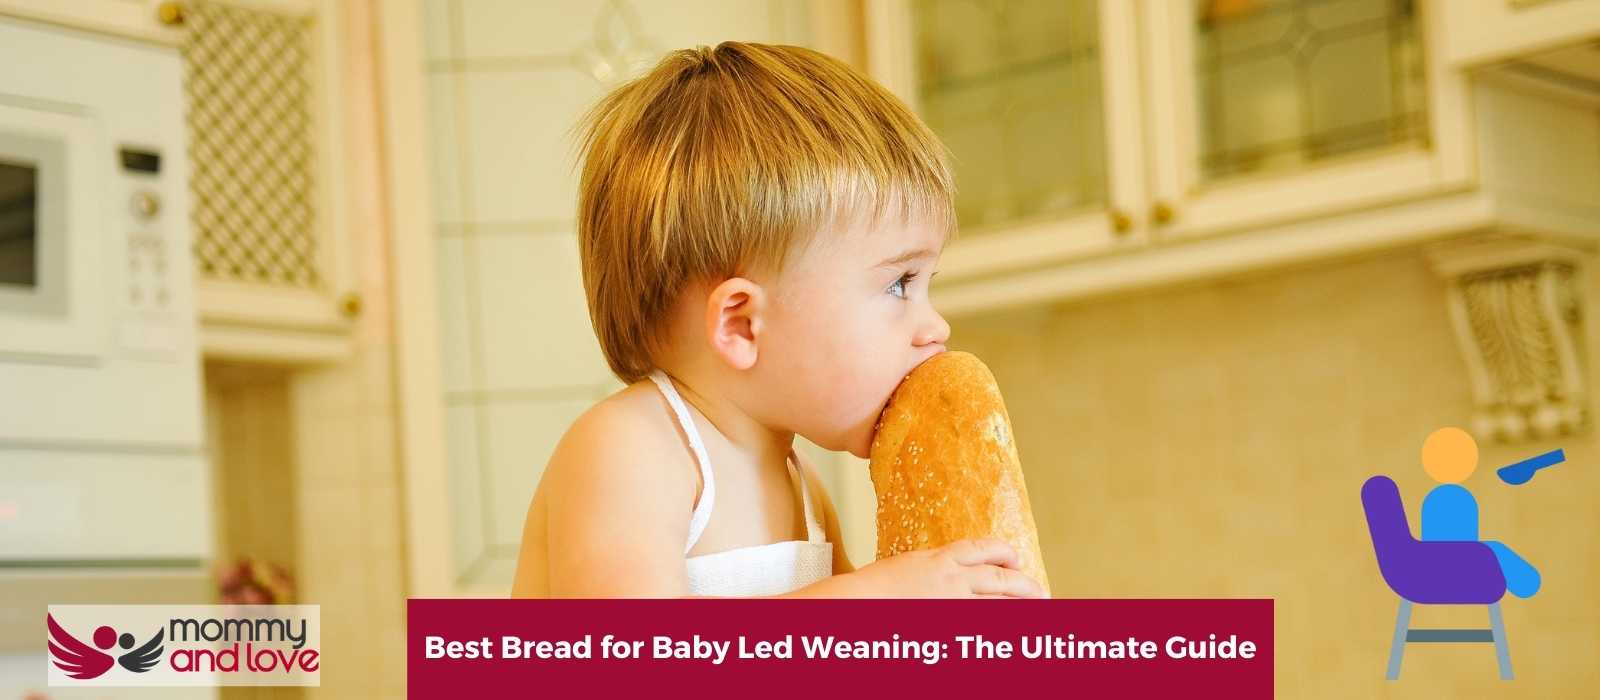 Best Bread for Baby Led Weaning: The Ultimate Guide